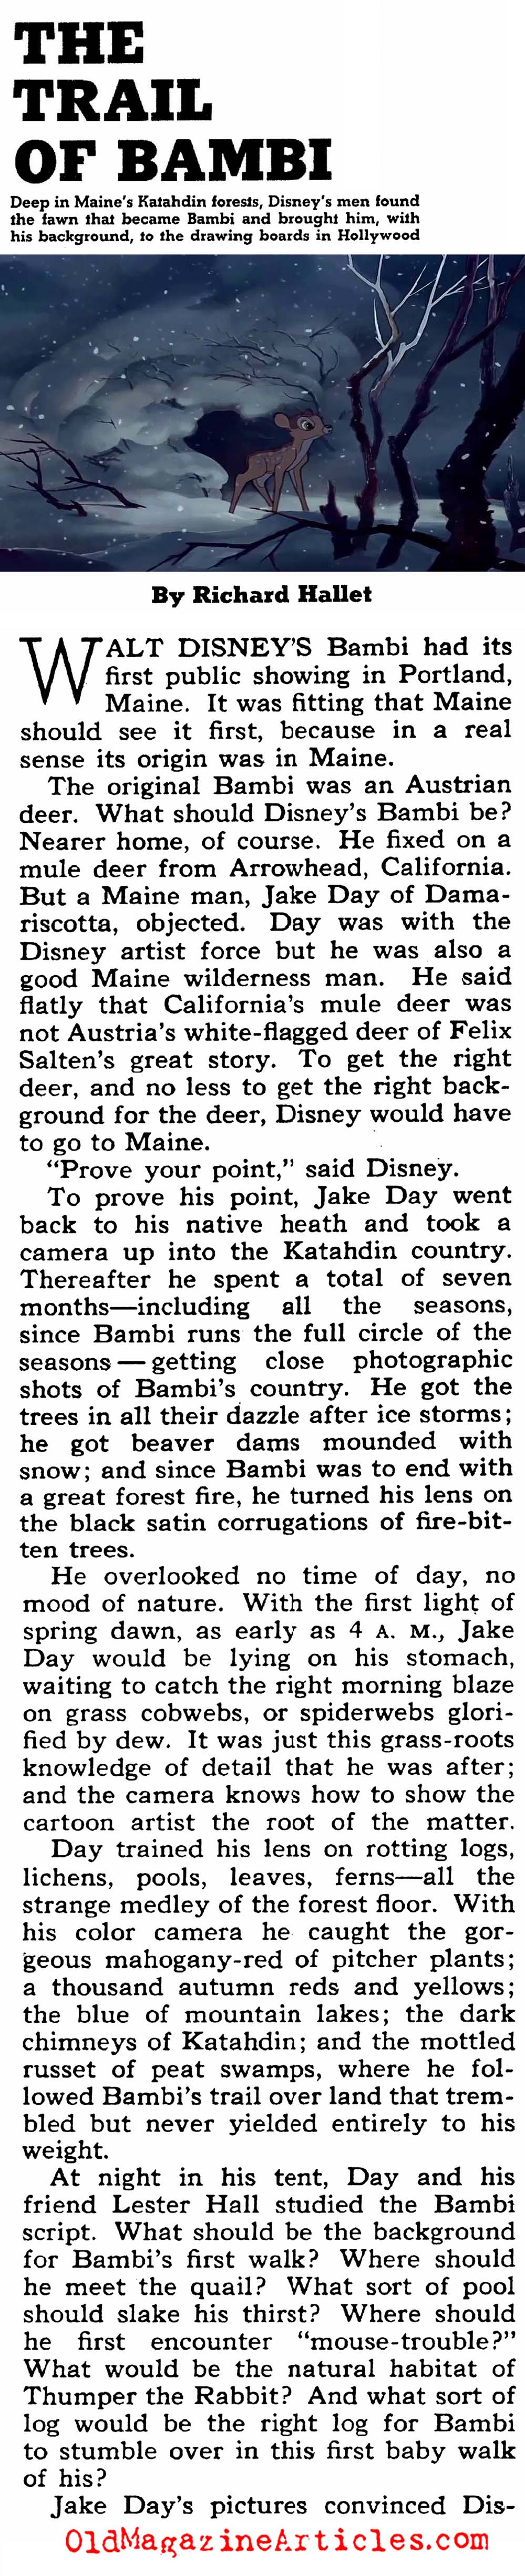 Walt Disney's Artists and the Making of 'Bambi' (Collier's Magazine, 1942)